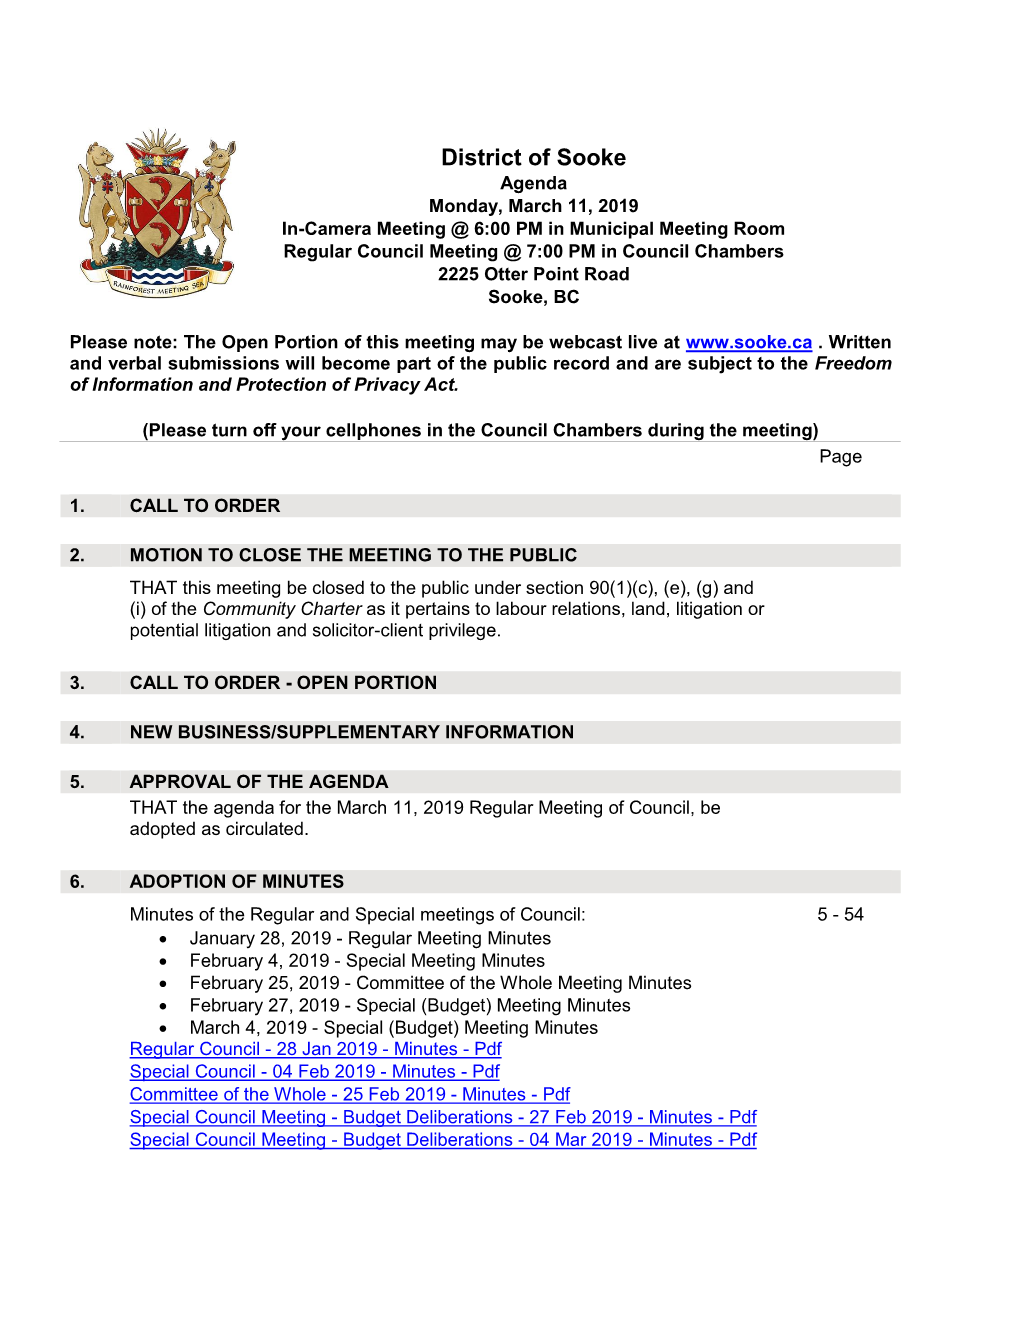 Regular Council Meeting @ 7:00 PM in Council Chambers 2225 Otter Point Road Sooke, BC